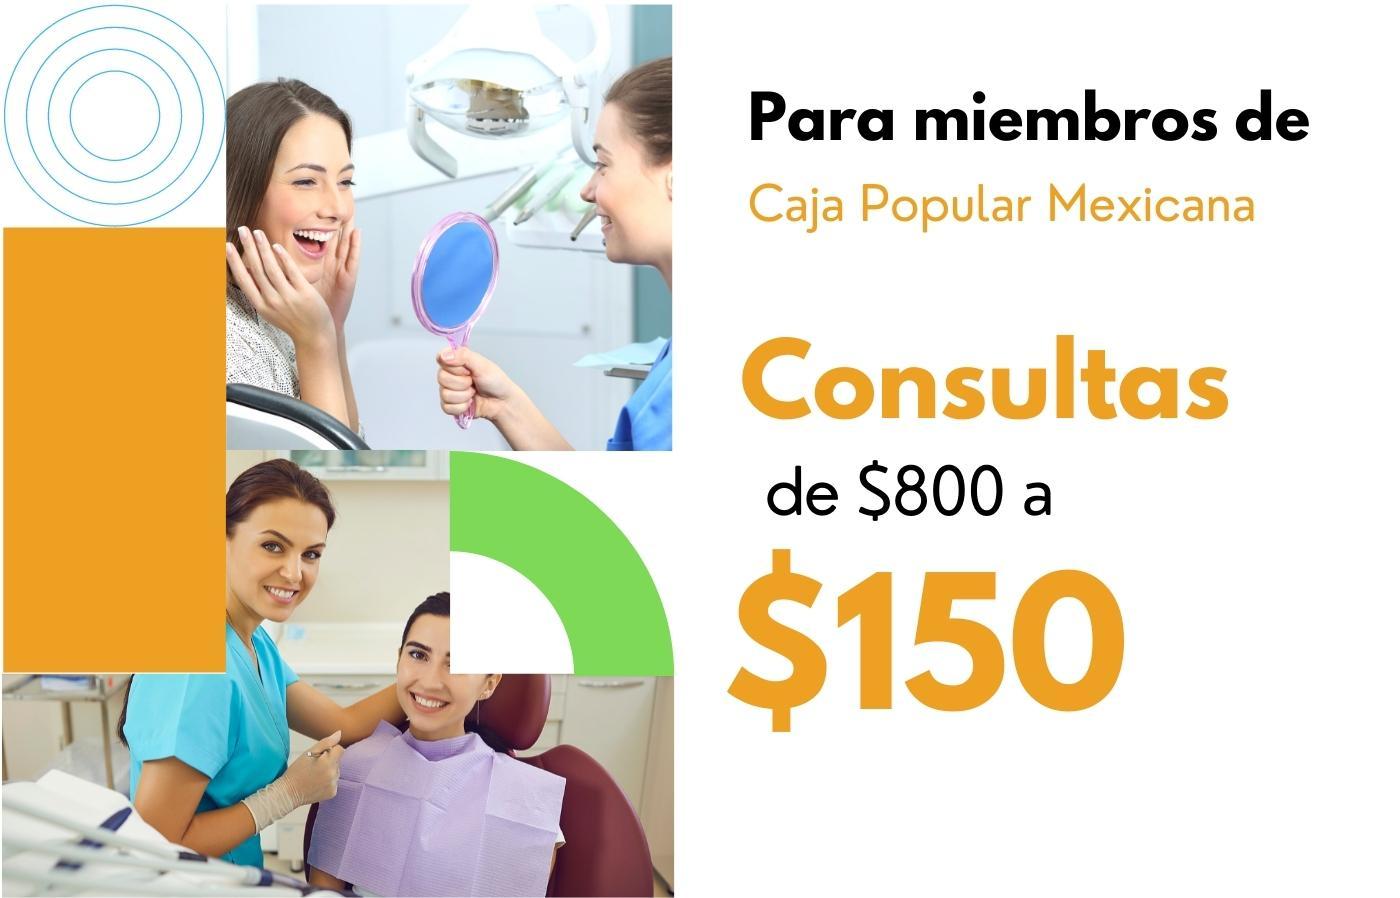 Odent - Clinica Dental